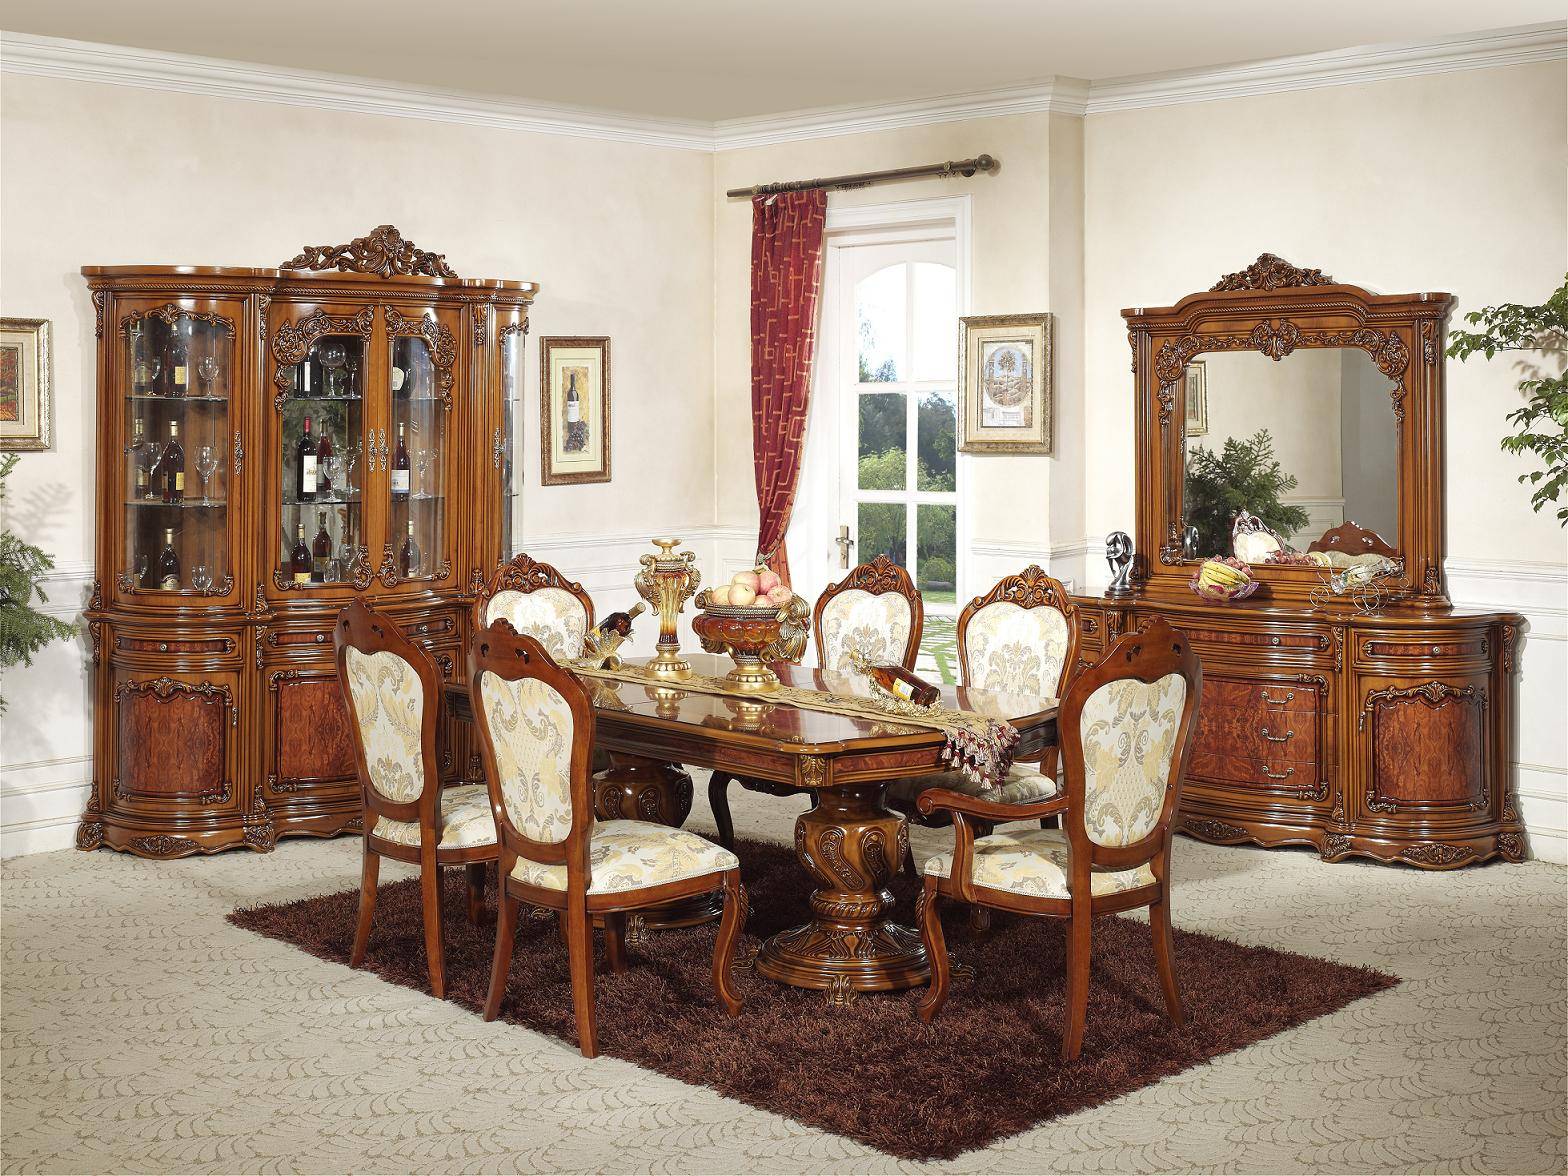 Spanish Style Dining Room Furniture, Dining Room In Spanish